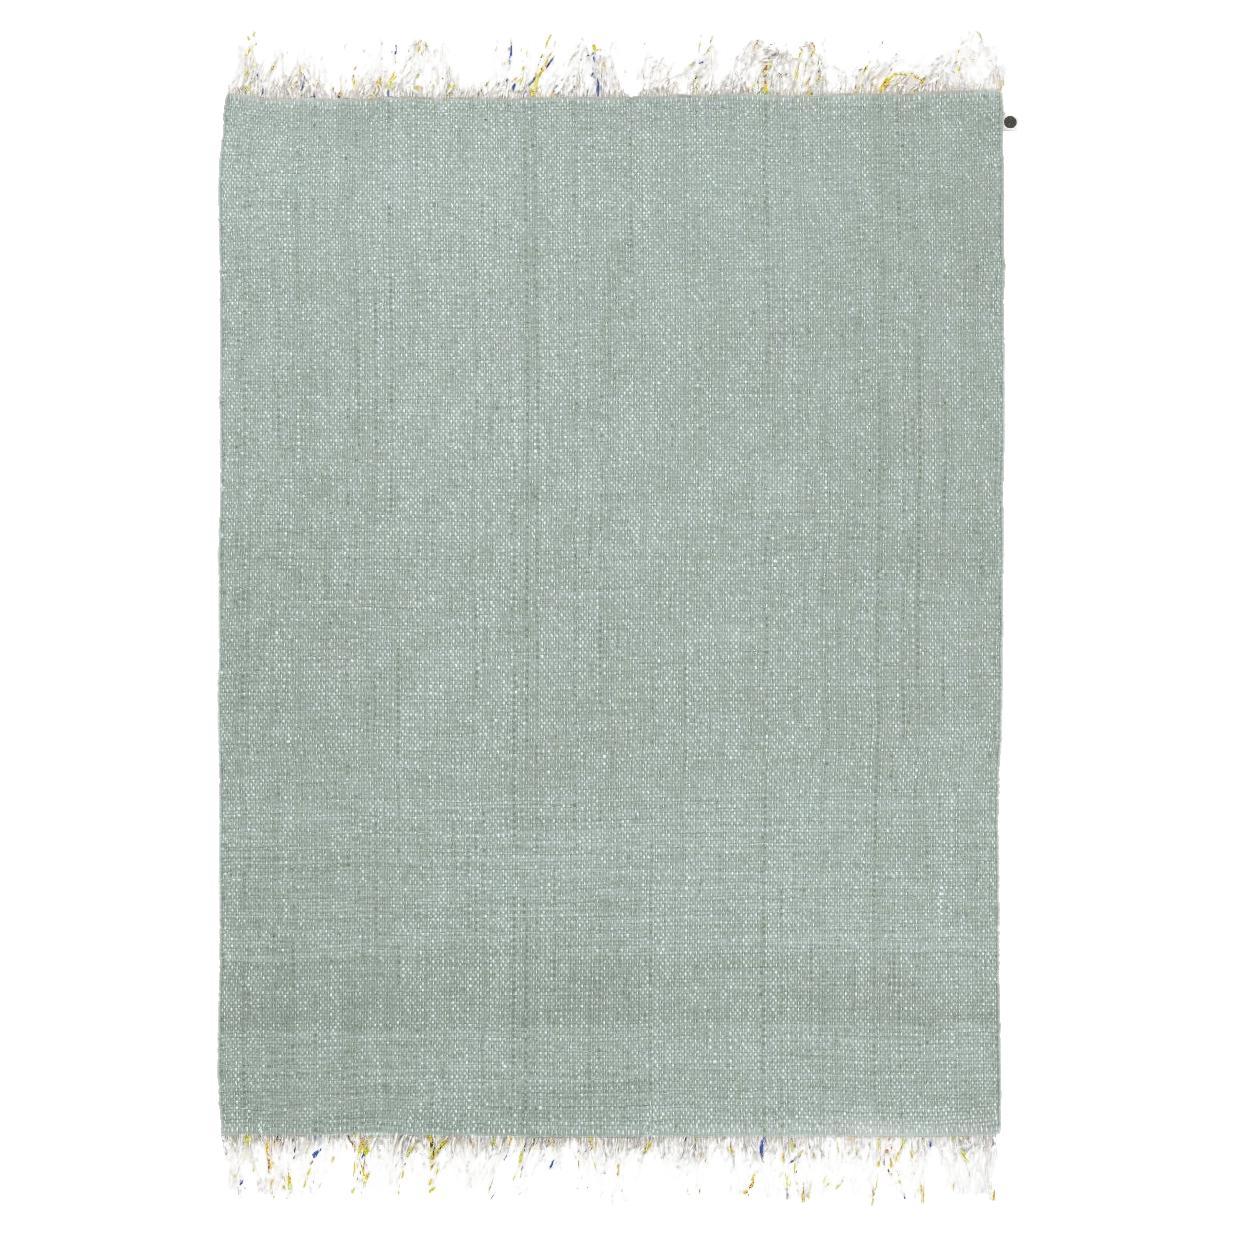 Candy Wrapper Rug_Dining_mint / Winning Woven Rug by Jutta Werner